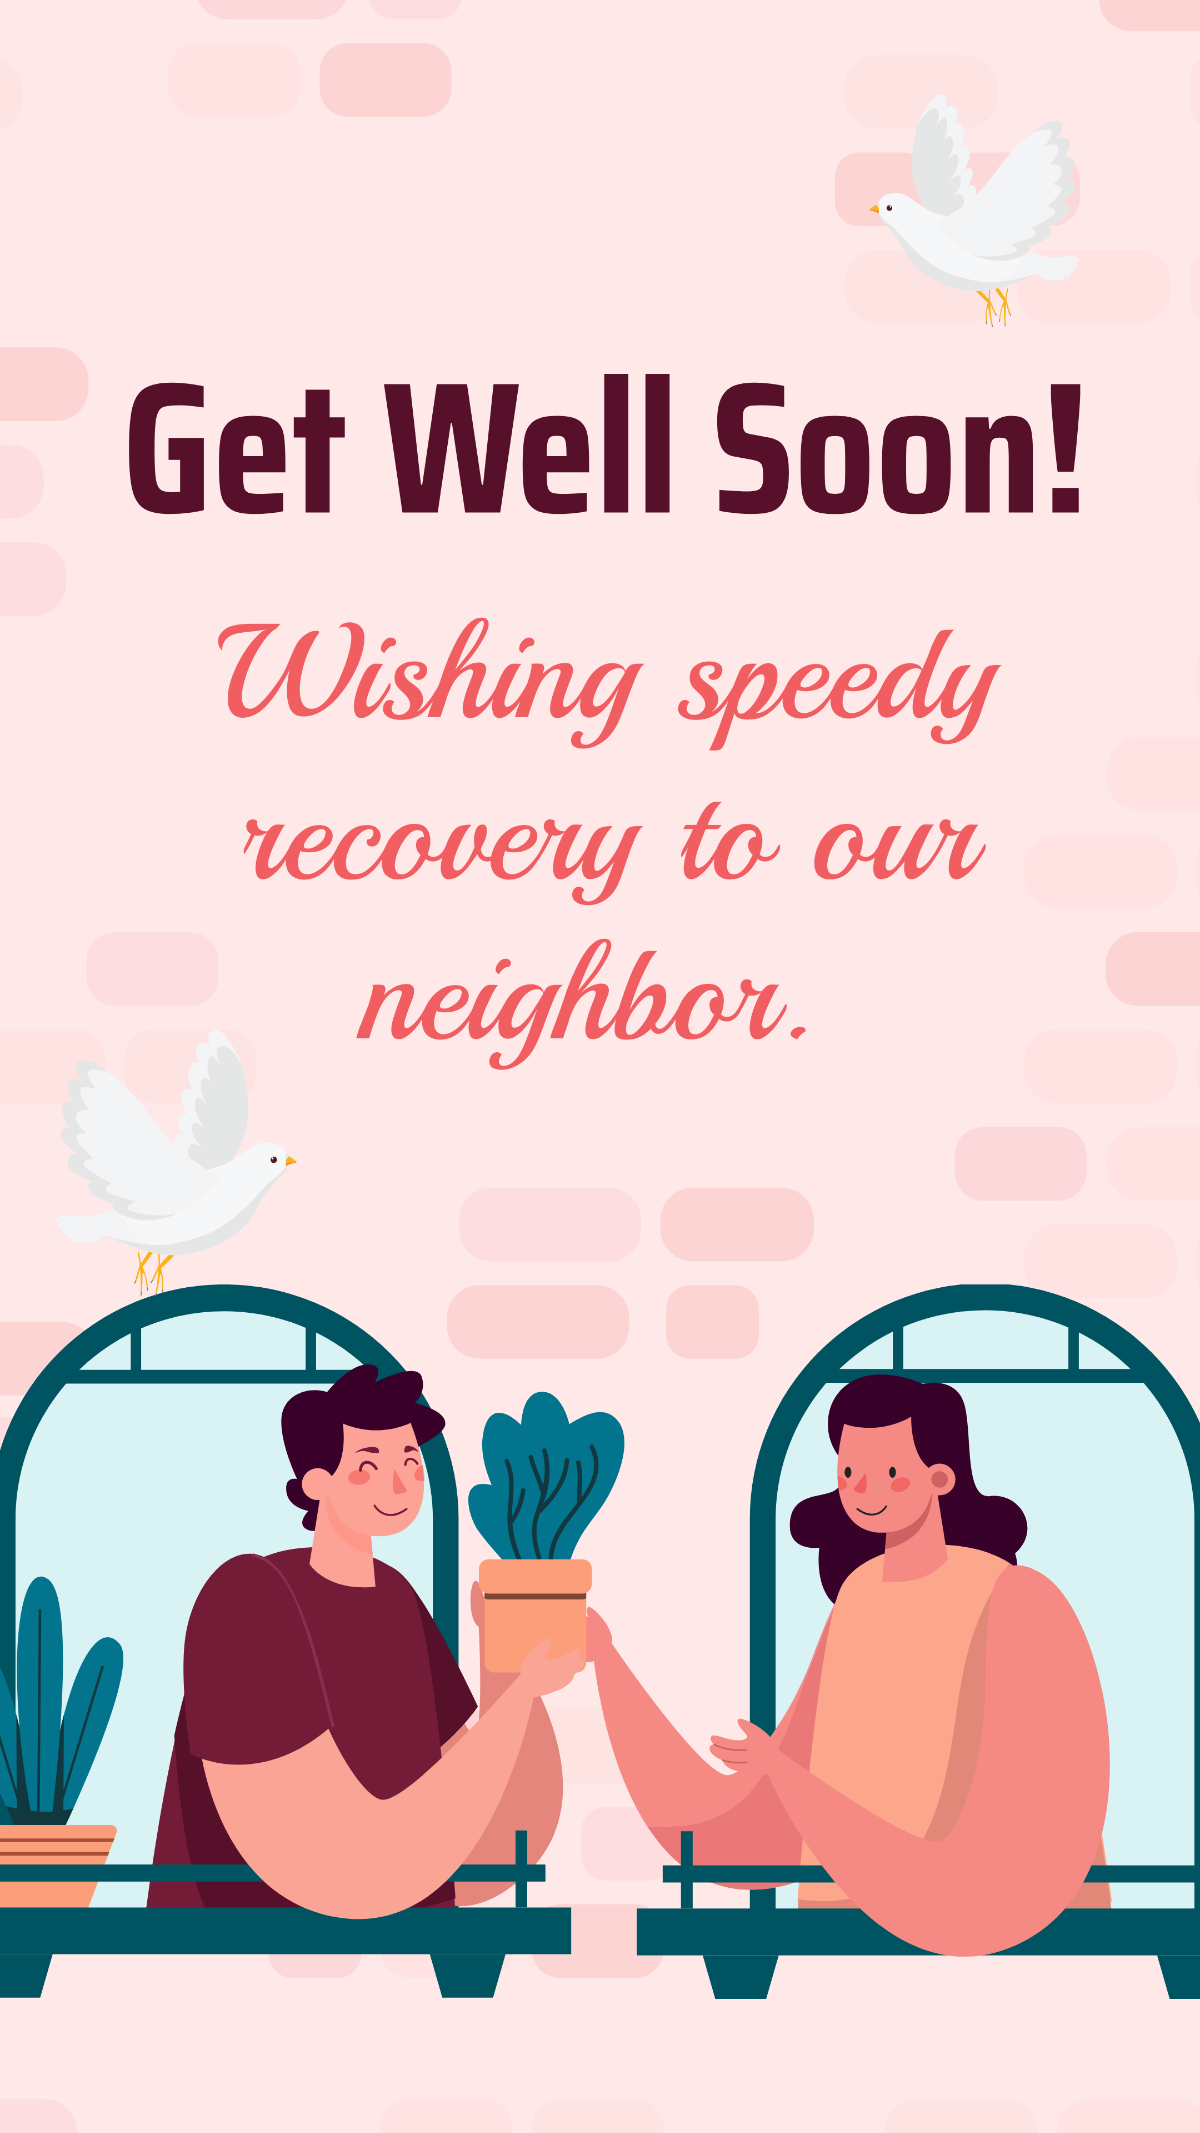 Get Well Soon Message For Neighbor